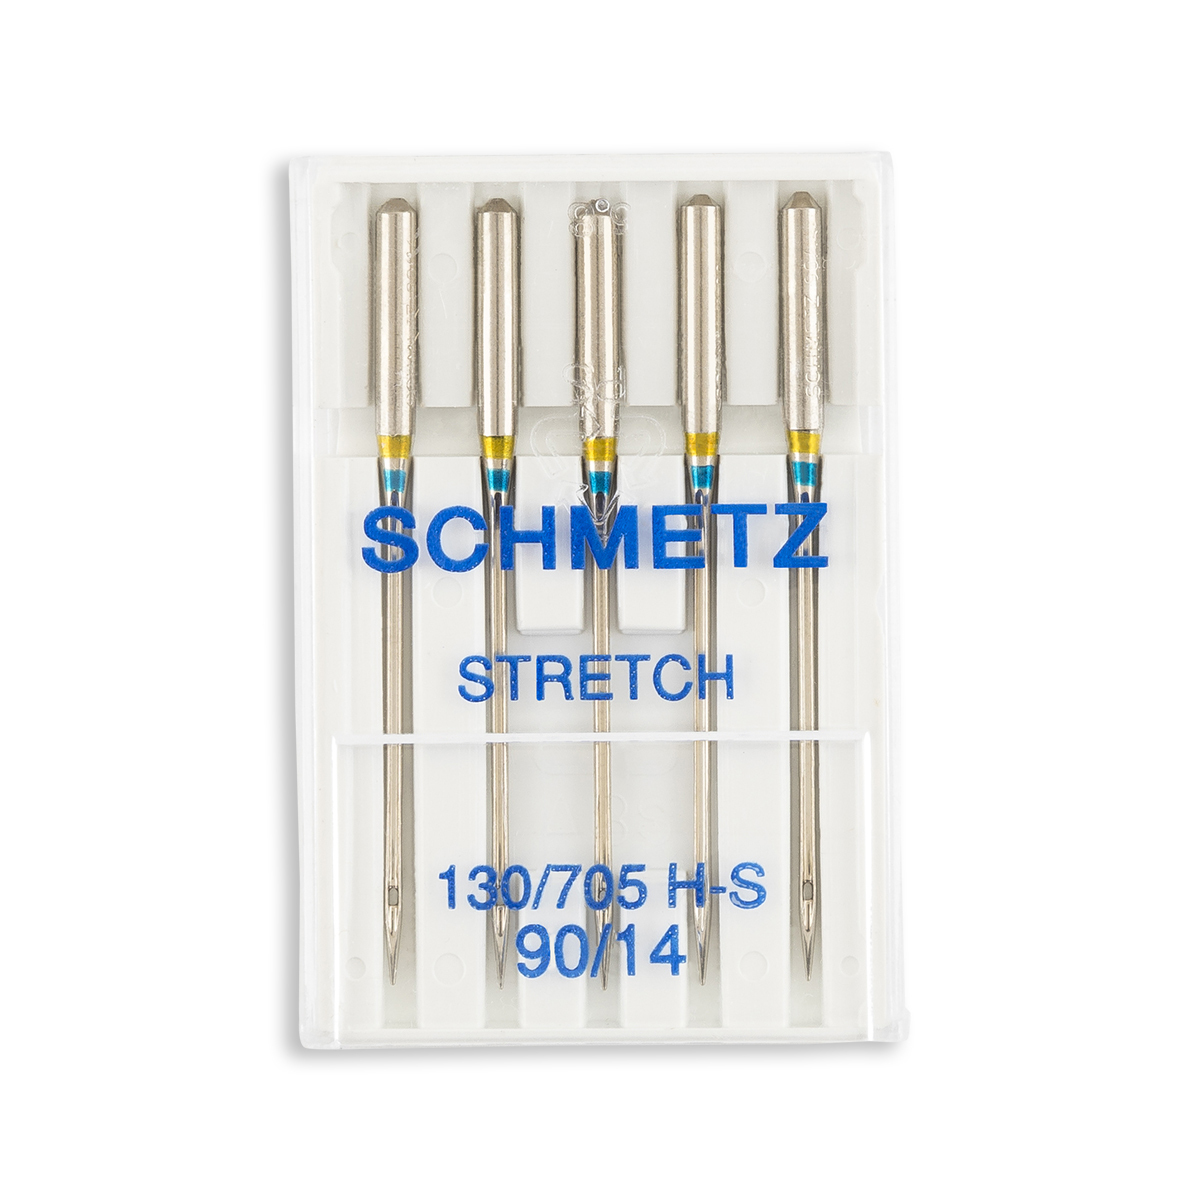 SCHMETZ Leather (130/705 HLL / 15X2NTW) Sewing Machine Needles - Carded -  Size 110/18